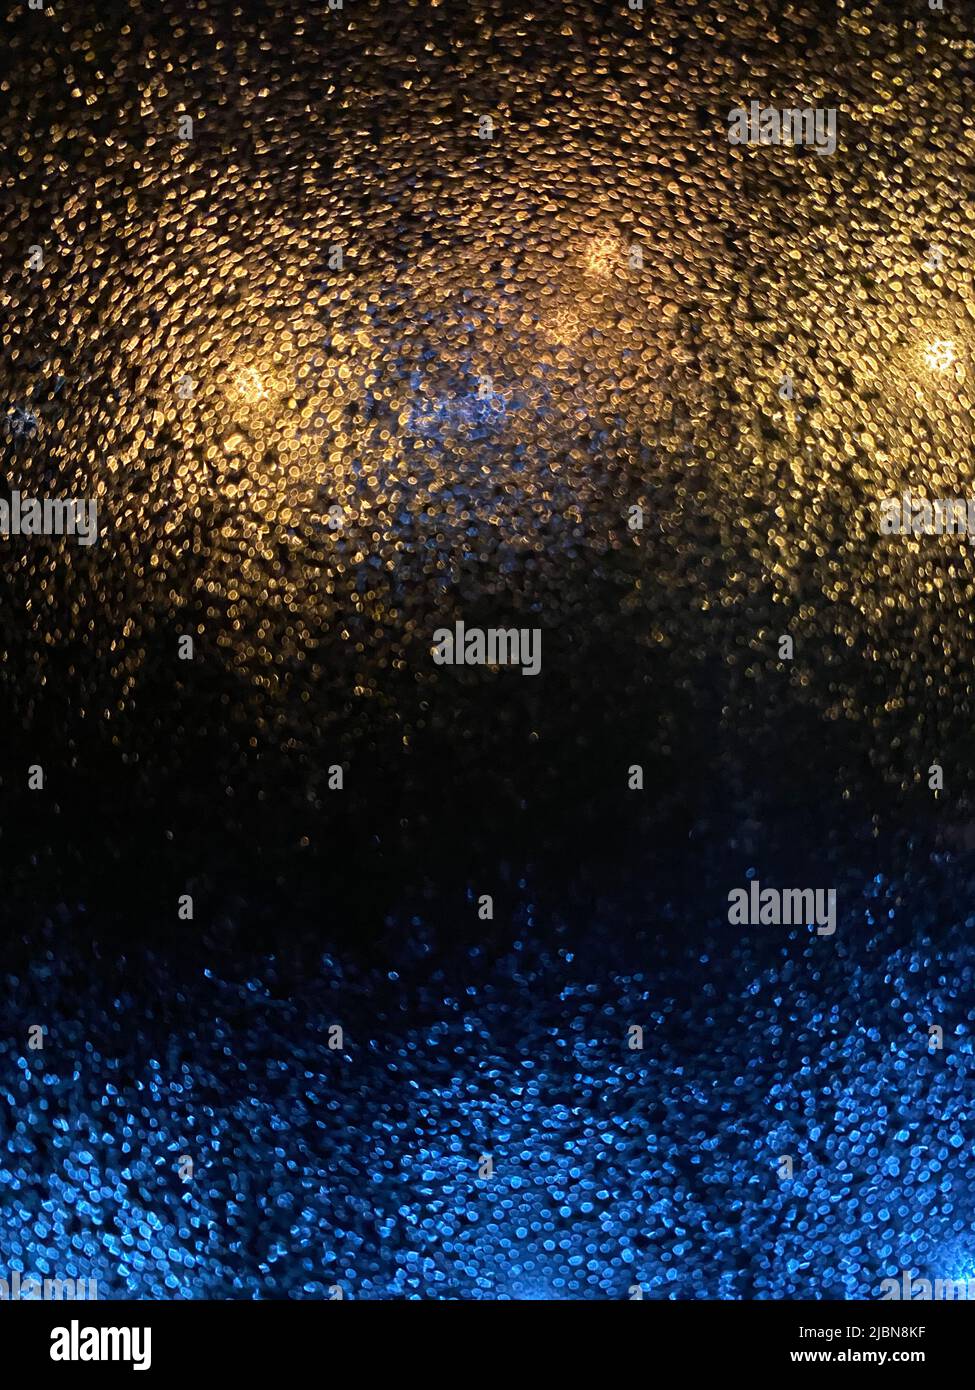 Photo of small rain splash drops on the windowpane, abstract images for backgrounds. Stock Photo